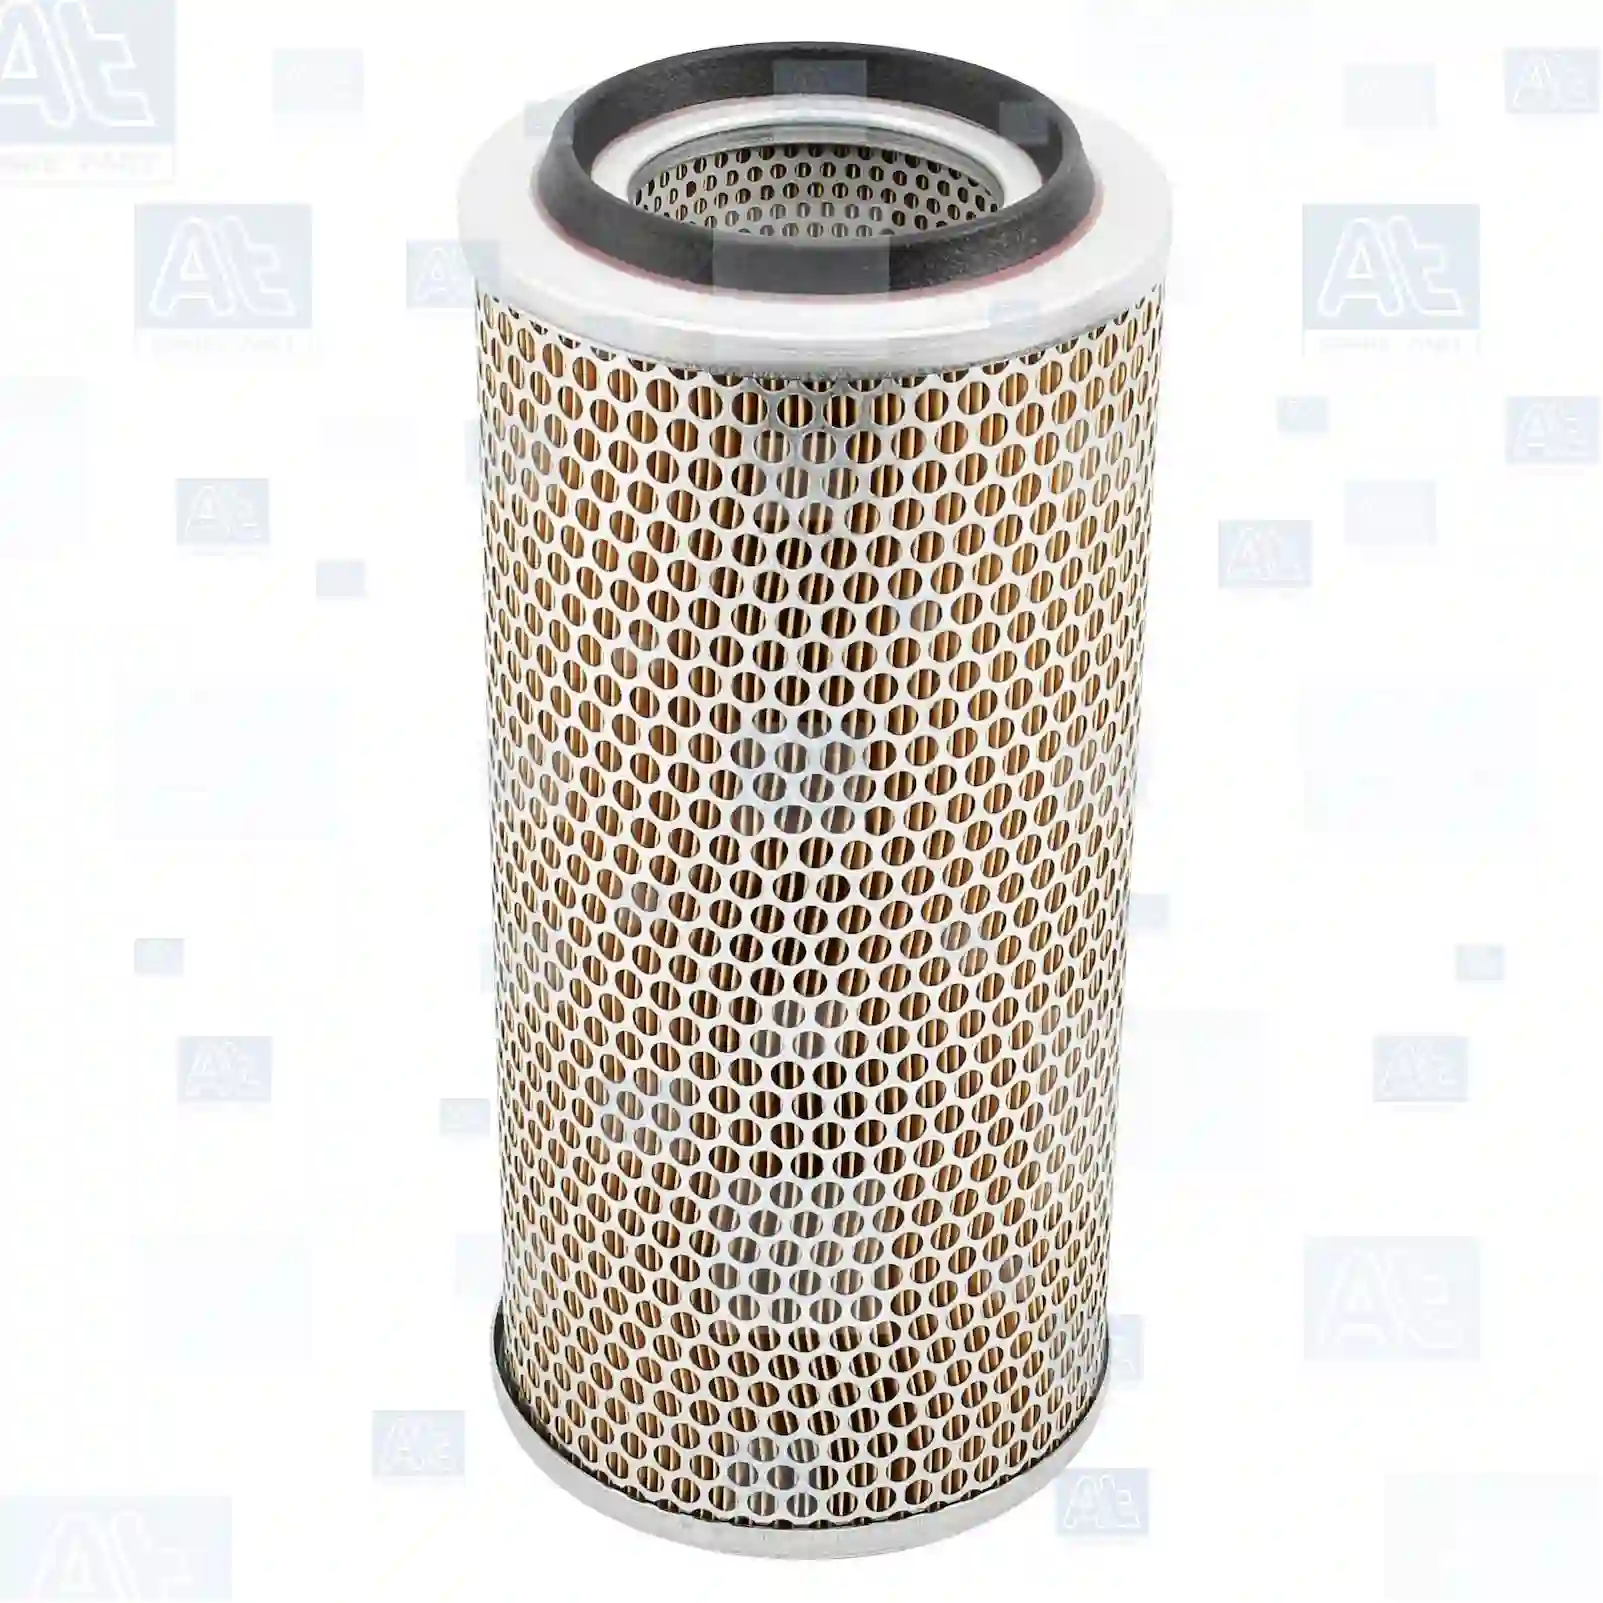 Air filter, 77706175, 146939R1, 161100190028, 3146939, 3146939R1, 3405458R1, V37721, 3I-0836, 645-110V, 6A-5110, 6A5-110V, 10944604, 20946004, 0006766000, 0006766001, 7701019017, 0695633, 1500185, 1534521, 695633, 04005074, 13203674, 43262300, 964013, 96401300, 01902127, 02165044, 02912005, 03018504, 1111402030600, 605412970032, 606901670113, 905412970013, 634478, 1111402030600, 0746383, 1470631, 4134368, F182200090010, F182200091010, F184200090010, F198200090010, 00479981, 01186044, 01265504, 01845281, 01902127, 02165044, 02192005, 02912005, 422165044, Y05771904, 479981, 5011318, 5011883, 2991920, 94621224, 9974135, 9059548, 94603894, 94621224, 9974135, 0009839015, 3252506M1, 4227324M91, 146939R1, 3146939R1, 3405458R1, V37721, 00634478, 01186044, 01265504, 01902127, 02165044, 101902127, 1265504, 1902127, 2165044, AZ20623, AZ20626, 01902127, 02165044, 02912005, 1753731, 5106182, 510618208, 5601593, 7361347, 7364434, 04522554134, 04522555114, 04522592304, 81083040053, 81083040054, 0010944604, 0020946004, 0030943304, 0160947902, 605412970032, 606901670113, 905412970013, 020317001, 00479981, 534478, 634478, 2710797M91, 992124, 350557, D350557, 0003563365, 0003563565, 0004207090, 0004309015, 0024551160, 4033109540, 5000823408, 5001010579, 5010140505, 6005019664, 7701019017, 7701363703, 7701364879, R797, 161100190028, 61100190013, 61100190028, 61200190027, 79000190701, 351650, 992124, AI3284, 293570, 800618, 82640400, CH12386, 4758610, 4785610, 47856109, 4785612, 6644839, 075129620A, T11129620, ZG00832-0008 ||  77706175 At Spare Part | Engine, Accelerator Pedal, Camshaft, Connecting Rod, Crankcase, Crankshaft, Cylinder Head, Engine Suspension Mountings, Exhaust Manifold, Exhaust Gas Recirculation, Filter Kits, Flywheel Housing, General Overhaul Kits, Engine, Intake Manifold, Oil Cleaner, Oil Cooler, Oil Filter, Oil Pump, Oil Sump, Piston & Liner, Sensor & Switch, Timing Case, Turbocharger, Cooling System, Belt Tensioner, Coolant Filter, Coolant Pipe, Corrosion Prevention Agent, Drive, Expansion Tank, Fan, Intercooler, Monitors & Gauges, Radiator, Thermostat, V-Belt / Timing belt, Water Pump, Fuel System, Electronical Injector Unit, Feed Pump, Fuel Filter, cpl., Fuel Gauge Sender,  Fuel Line, Fuel Pump, Fuel Tank, Injection Line Kit, Injection Pump, Exhaust System, Clutch & Pedal, Gearbox, Propeller Shaft, Axles, Brake System, Hubs & Wheels, Suspension, Leaf Spring, Universal Parts / Accessories, Steering, Electrical System, Cabin Air filter, 77706175, 146939R1, 161100190028, 3146939, 3146939R1, 3405458R1, V37721, 3I-0836, 645-110V, 6A-5110, 6A5-110V, 10944604, 20946004, 0006766000, 0006766001, 7701019017, 0695633, 1500185, 1534521, 695633, 04005074, 13203674, 43262300, 964013, 96401300, 01902127, 02165044, 02912005, 03018504, 1111402030600, 605412970032, 606901670113, 905412970013, 634478, 1111402030600, 0746383, 1470631, 4134368, F182200090010, F182200091010, F184200090010, F198200090010, 00479981, 01186044, 01265504, 01845281, 01902127, 02165044, 02192005, 02912005, 422165044, Y05771904, 479981, 5011318, 5011883, 2991920, 94621224, 9974135, 9059548, 94603894, 94621224, 9974135, 0009839015, 3252506M1, 4227324M91, 146939R1, 3146939R1, 3405458R1, V37721, 00634478, 01186044, 01265504, 01902127, 02165044, 101902127, 1265504, 1902127, 2165044, AZ20623, AZ20626, 01902127, 02165044, 02912005, 1753731, 5106182, 510618208, 5601593, 7361347, 7364434, 04522554134, 04522555114, 04522592304, 81083040053, 81083040054, 0010944604, 0020946004, 0030943304, 0160947902, 605412970032, 606901670113, 905412970013, 020317001, 00479981, 534478, 634478, 2710797M91, 992124, 350557, D350557, 0003563365, 0003563565, 0004207090, 0004309015, 0024551160, 4033109540, 5000823408, 5001010579, 5010140505, 6005019664, 7701019017, 7701363703, 7701364879, R797, 161100190028, 61100190013, 61100190028, 61200190027, 79000190701, 351650, 992124, AI3284, 293570, 800618, 82640400, CH12386, 4758610, 4785610, 47856109, 4785612, 6644839, 075129620A, T11129620, ZG00832-0008 ||  77706175 At Spare Part | Engine, Accelerator Pedal, Camshaft, Connecting Rod, Crankcase, Crankshaft, Cylinder Head, Engine Suspension Mountings, Exhaust Manifold, Exhaust Gas Recirculation, Filter Kits, Flywheel Housing, General Overhaul Kits, Engine, Intake Manifold, Oil Cleaner, Oil Cooler, Oil Filter, Oil Pump, Oil Sump, Piston & Liner, Sensor & Switch, Timing Case, Turbocharger, Cooling System, Belt Tensioner, Coolant Filter, Coolant Pipe, Corrosion Prevention Agent, Drive, Expansion Tank, Fan, Intercooler, Monitors & Gauges, Radiator, Thermostat, V-Belt / Timing belt, Water Pump, Fuel System, Electronical Injector Unit, Feed Pump, Fuel Filter, cpl., Fuel Gauge Sender,  Fuel Line, Fuel Pump, Fuel Tank, Injection Line Kit, Injection Pump, Exhaust System, Clutch & Pedal, Gearbox, Propeller Shaft, Axles, Brake System, Hubs & Wheels, Suspension, Leaf Spring, Universal Parts / Accessories, Steering, Electrical System, Cabin